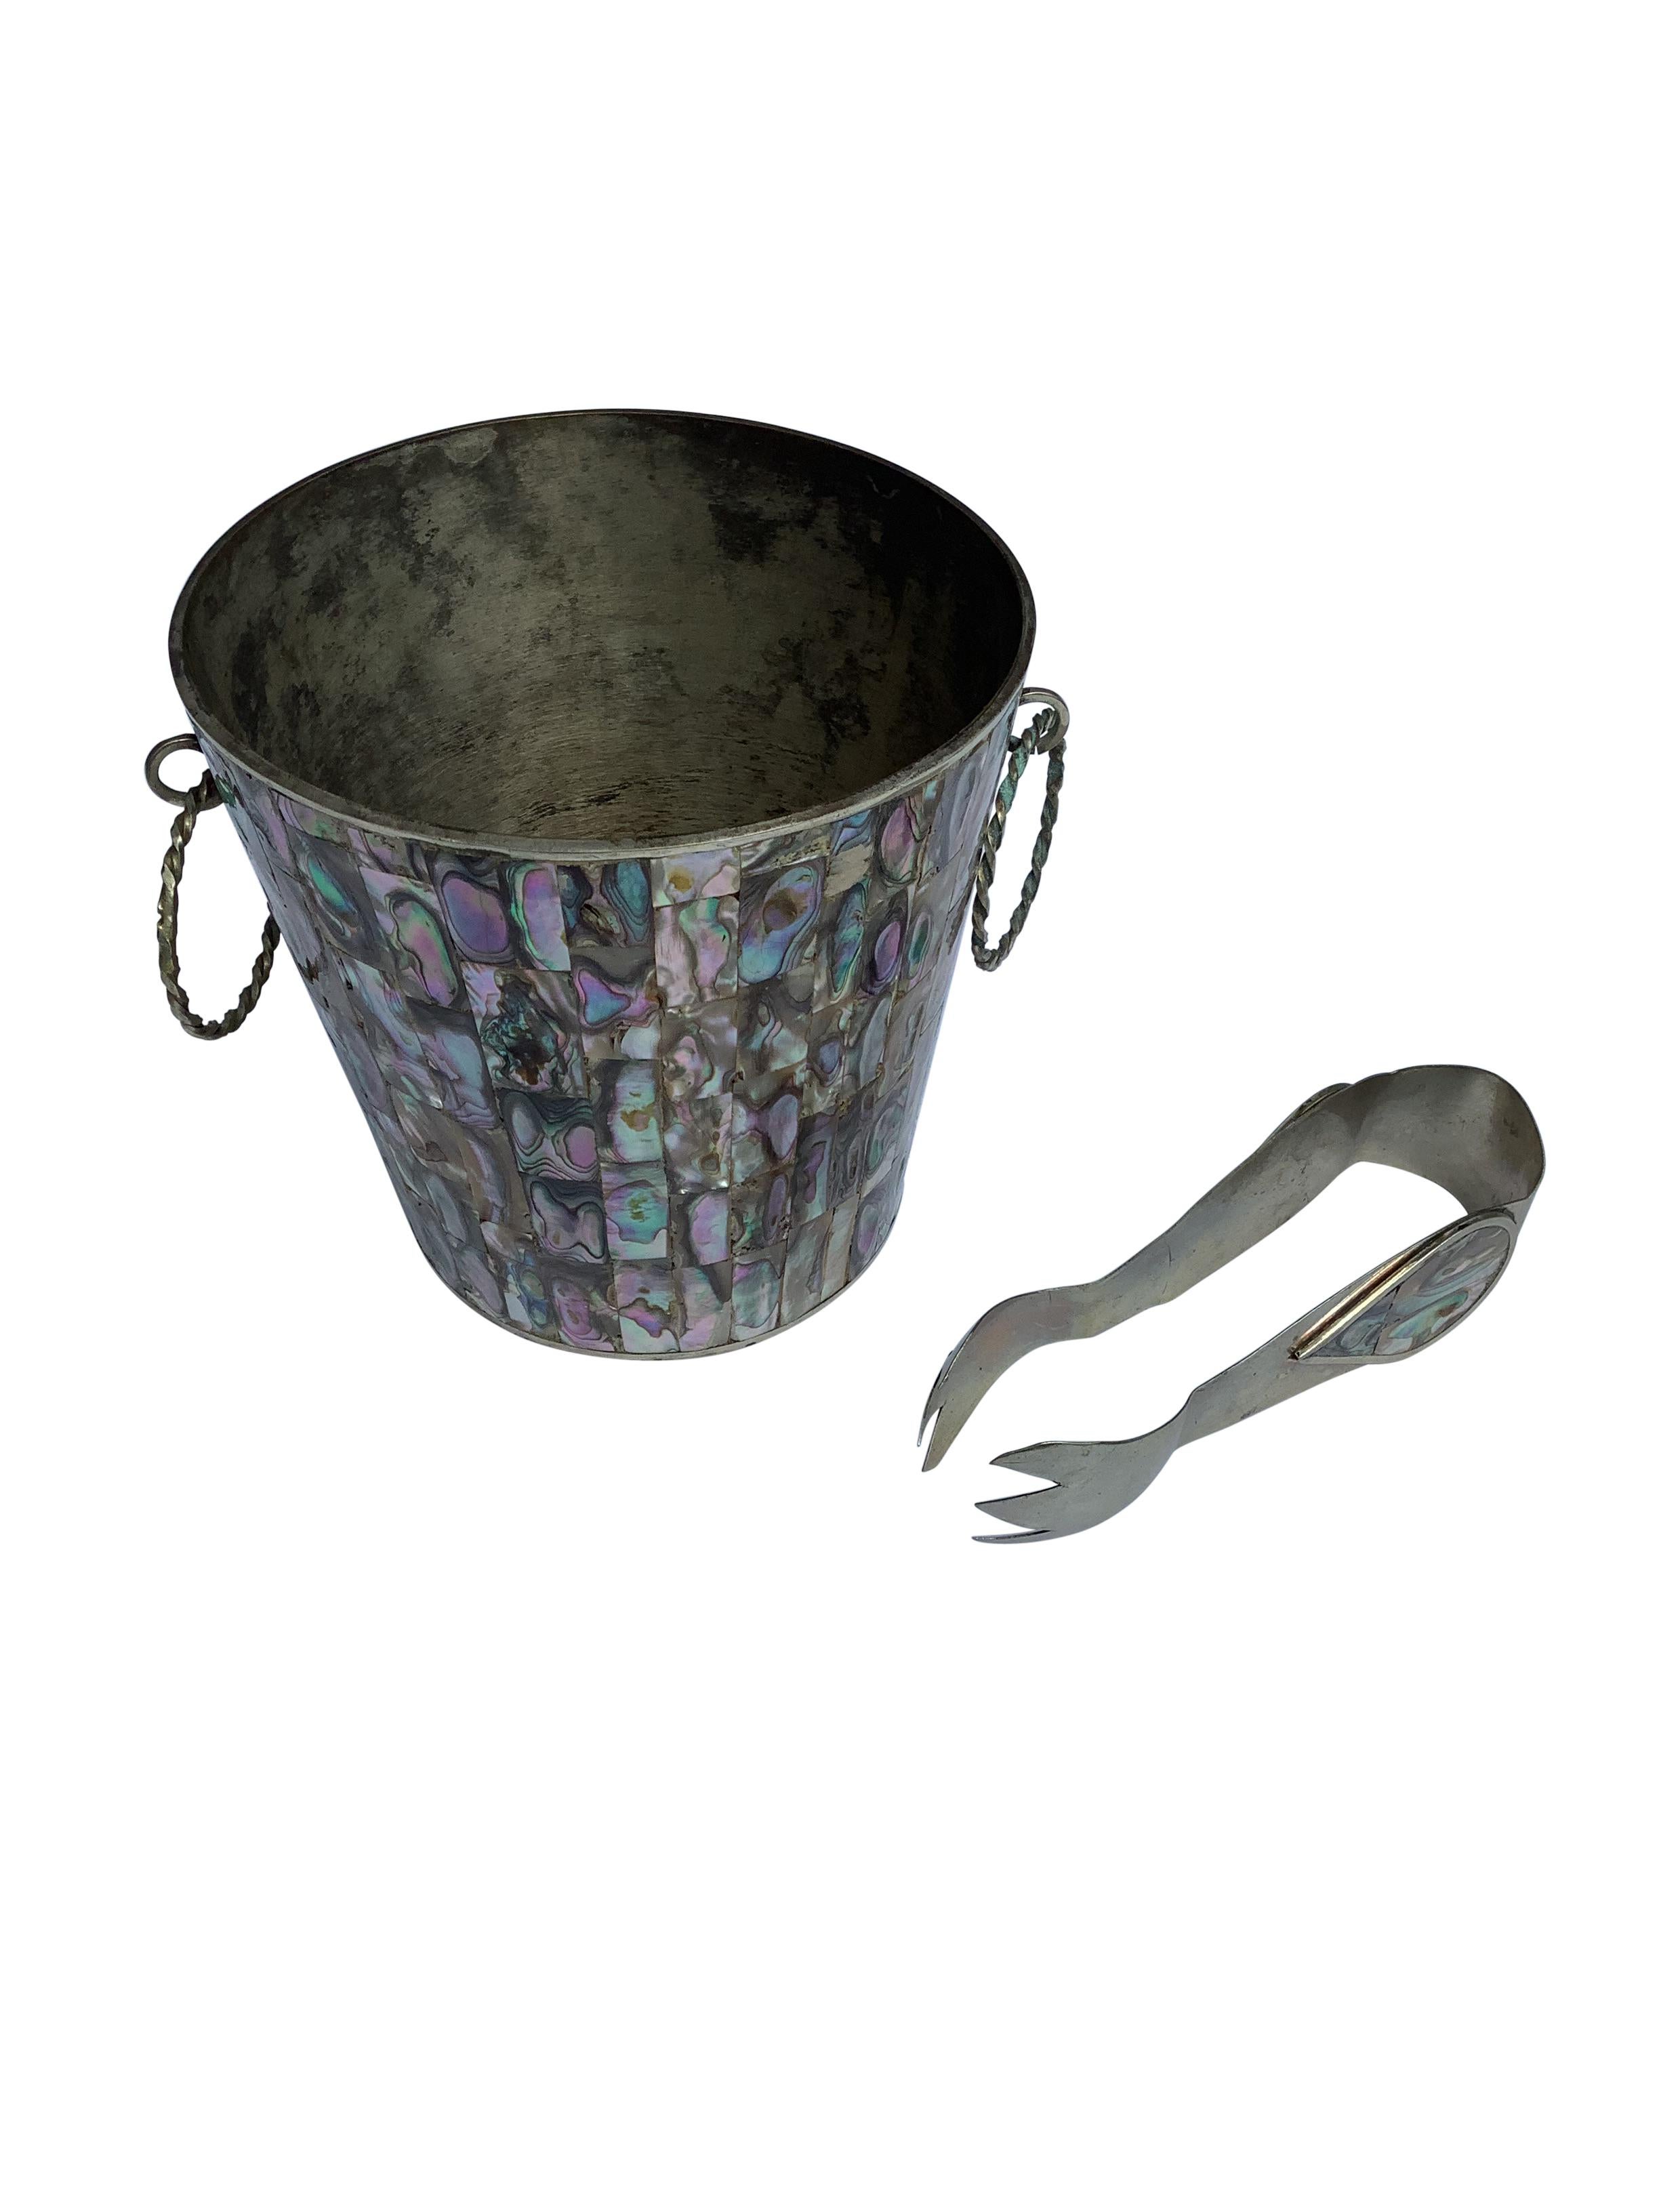 Vintage Mexican Abalone and Alpaca Silver Ice Bucket and Tongs with twisted ring handles. Colorful individual tiles of abalone adorn the metal bucket. Stamped on bottom Alpaca Mexico.
